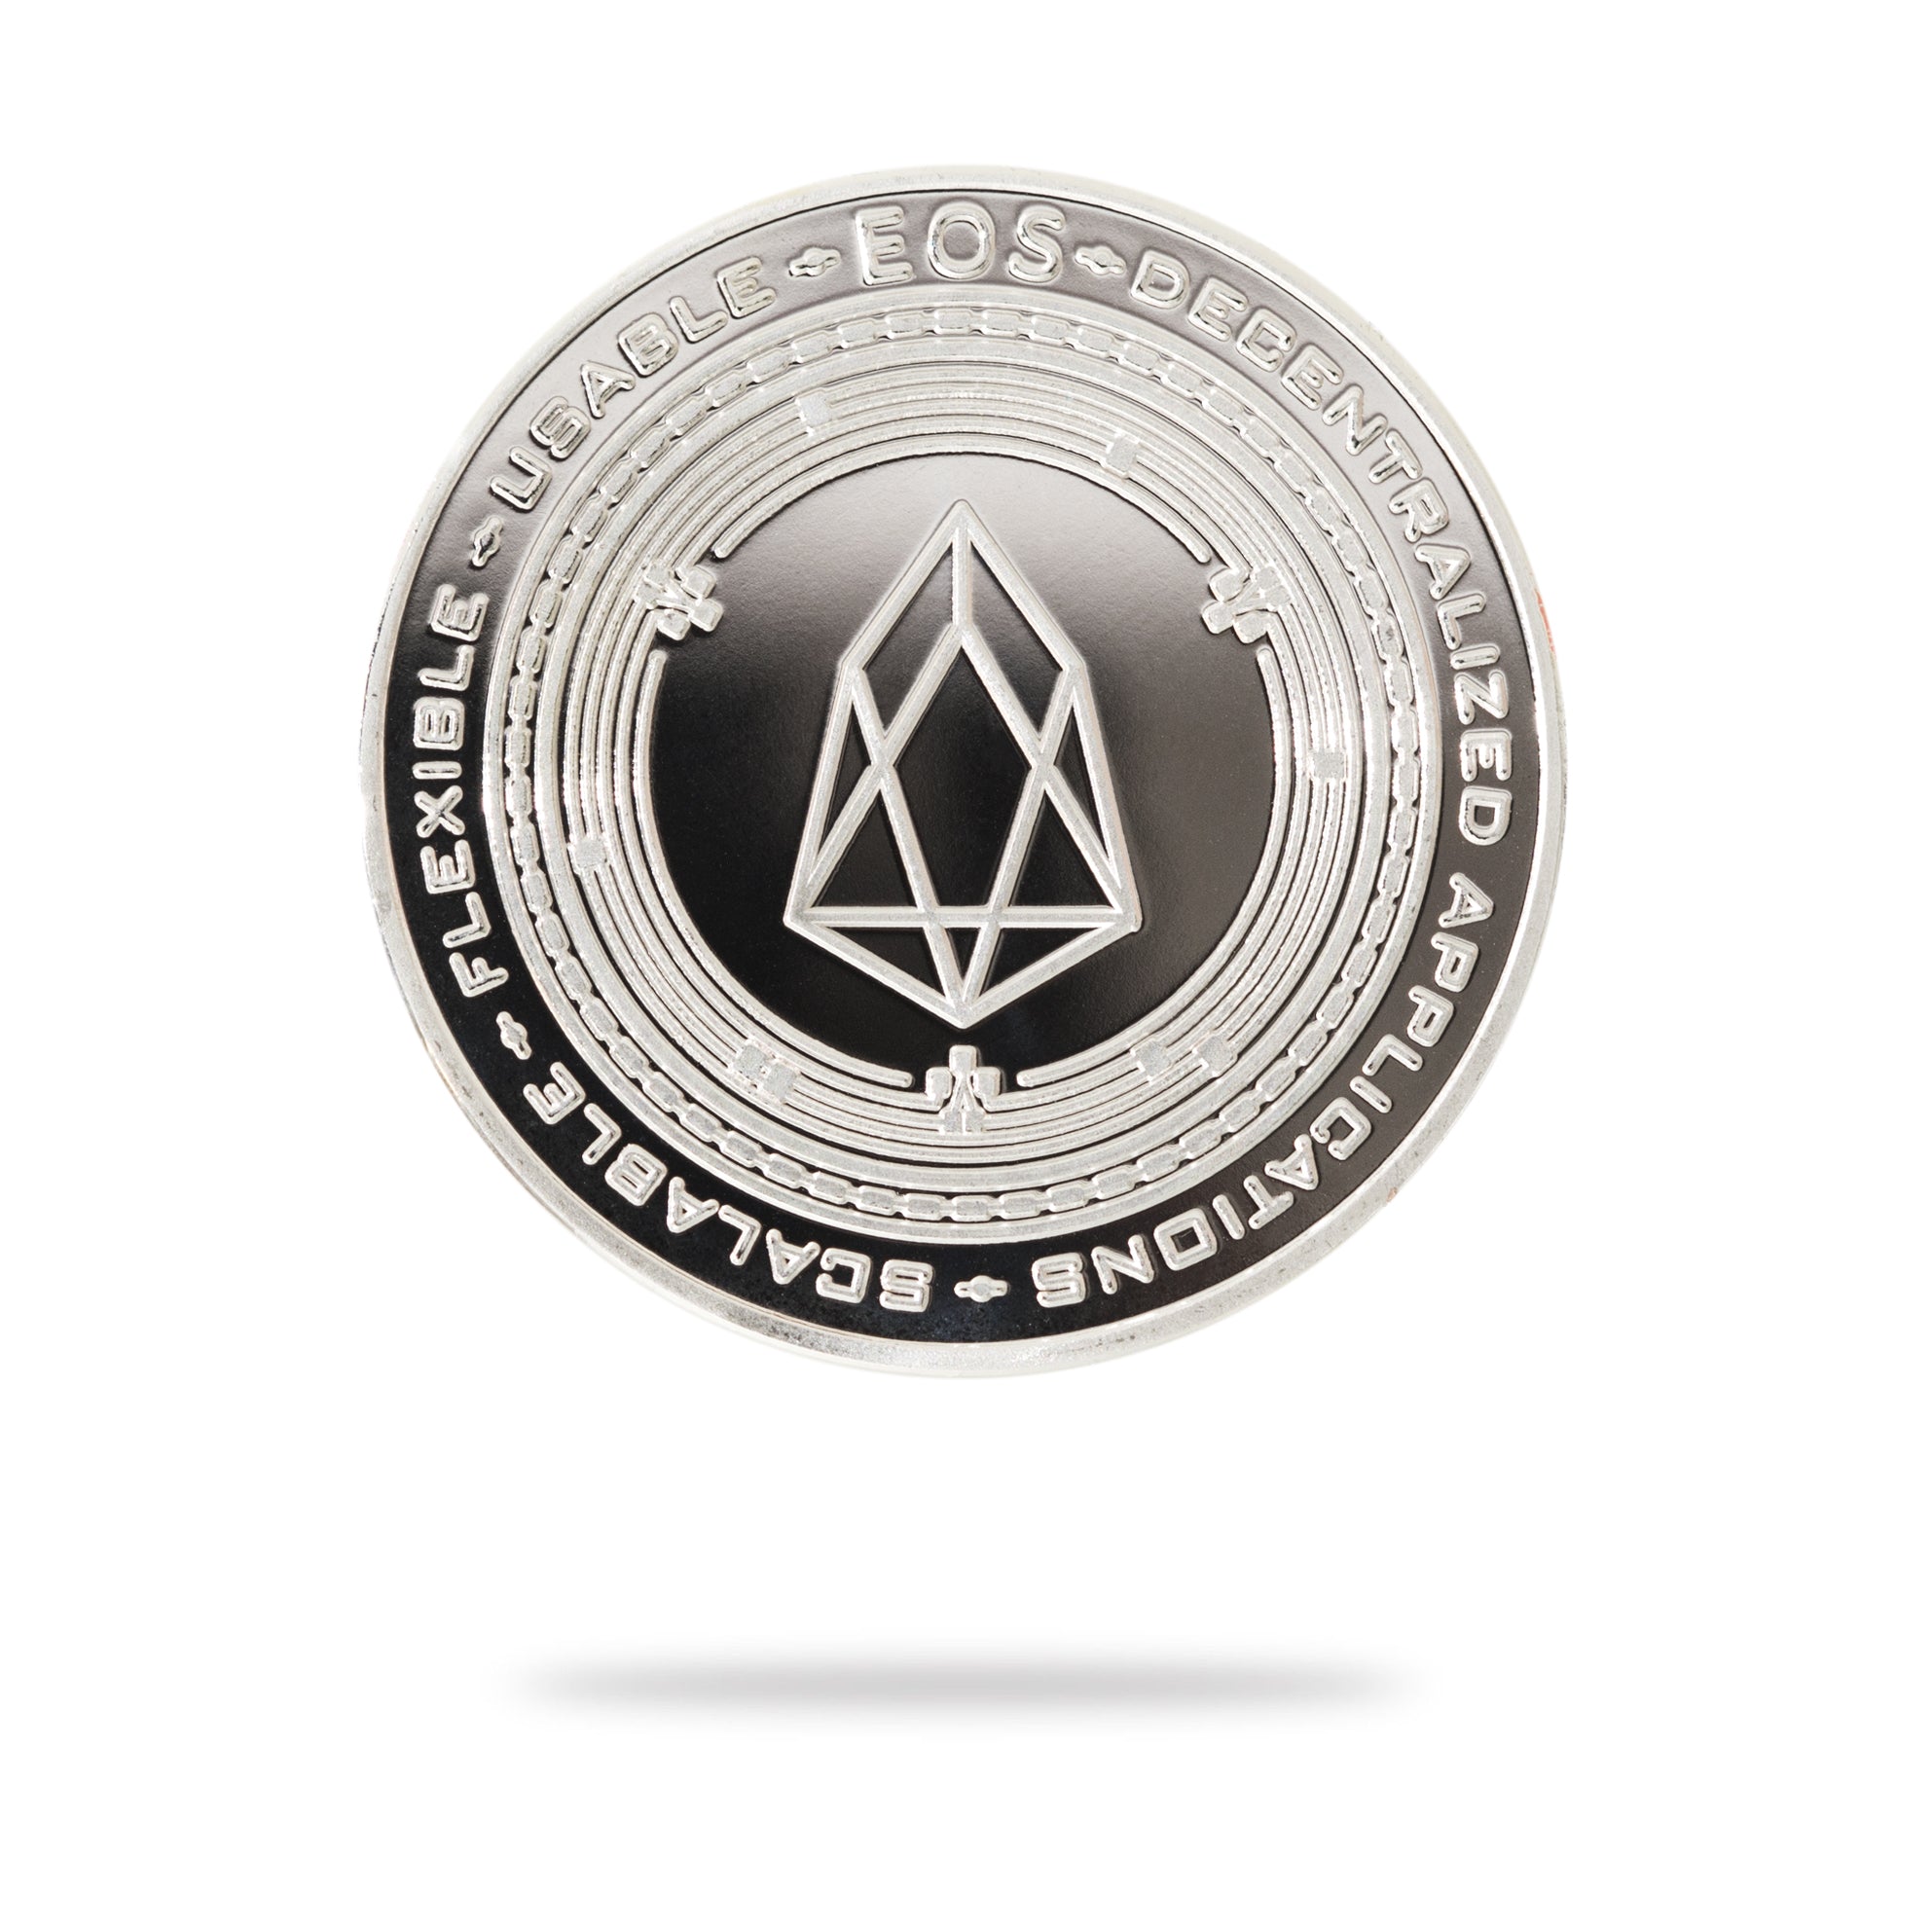 Cryptochips | EOS Physical Crypto Coin. Collectable cryptocurrency merch you can hodl